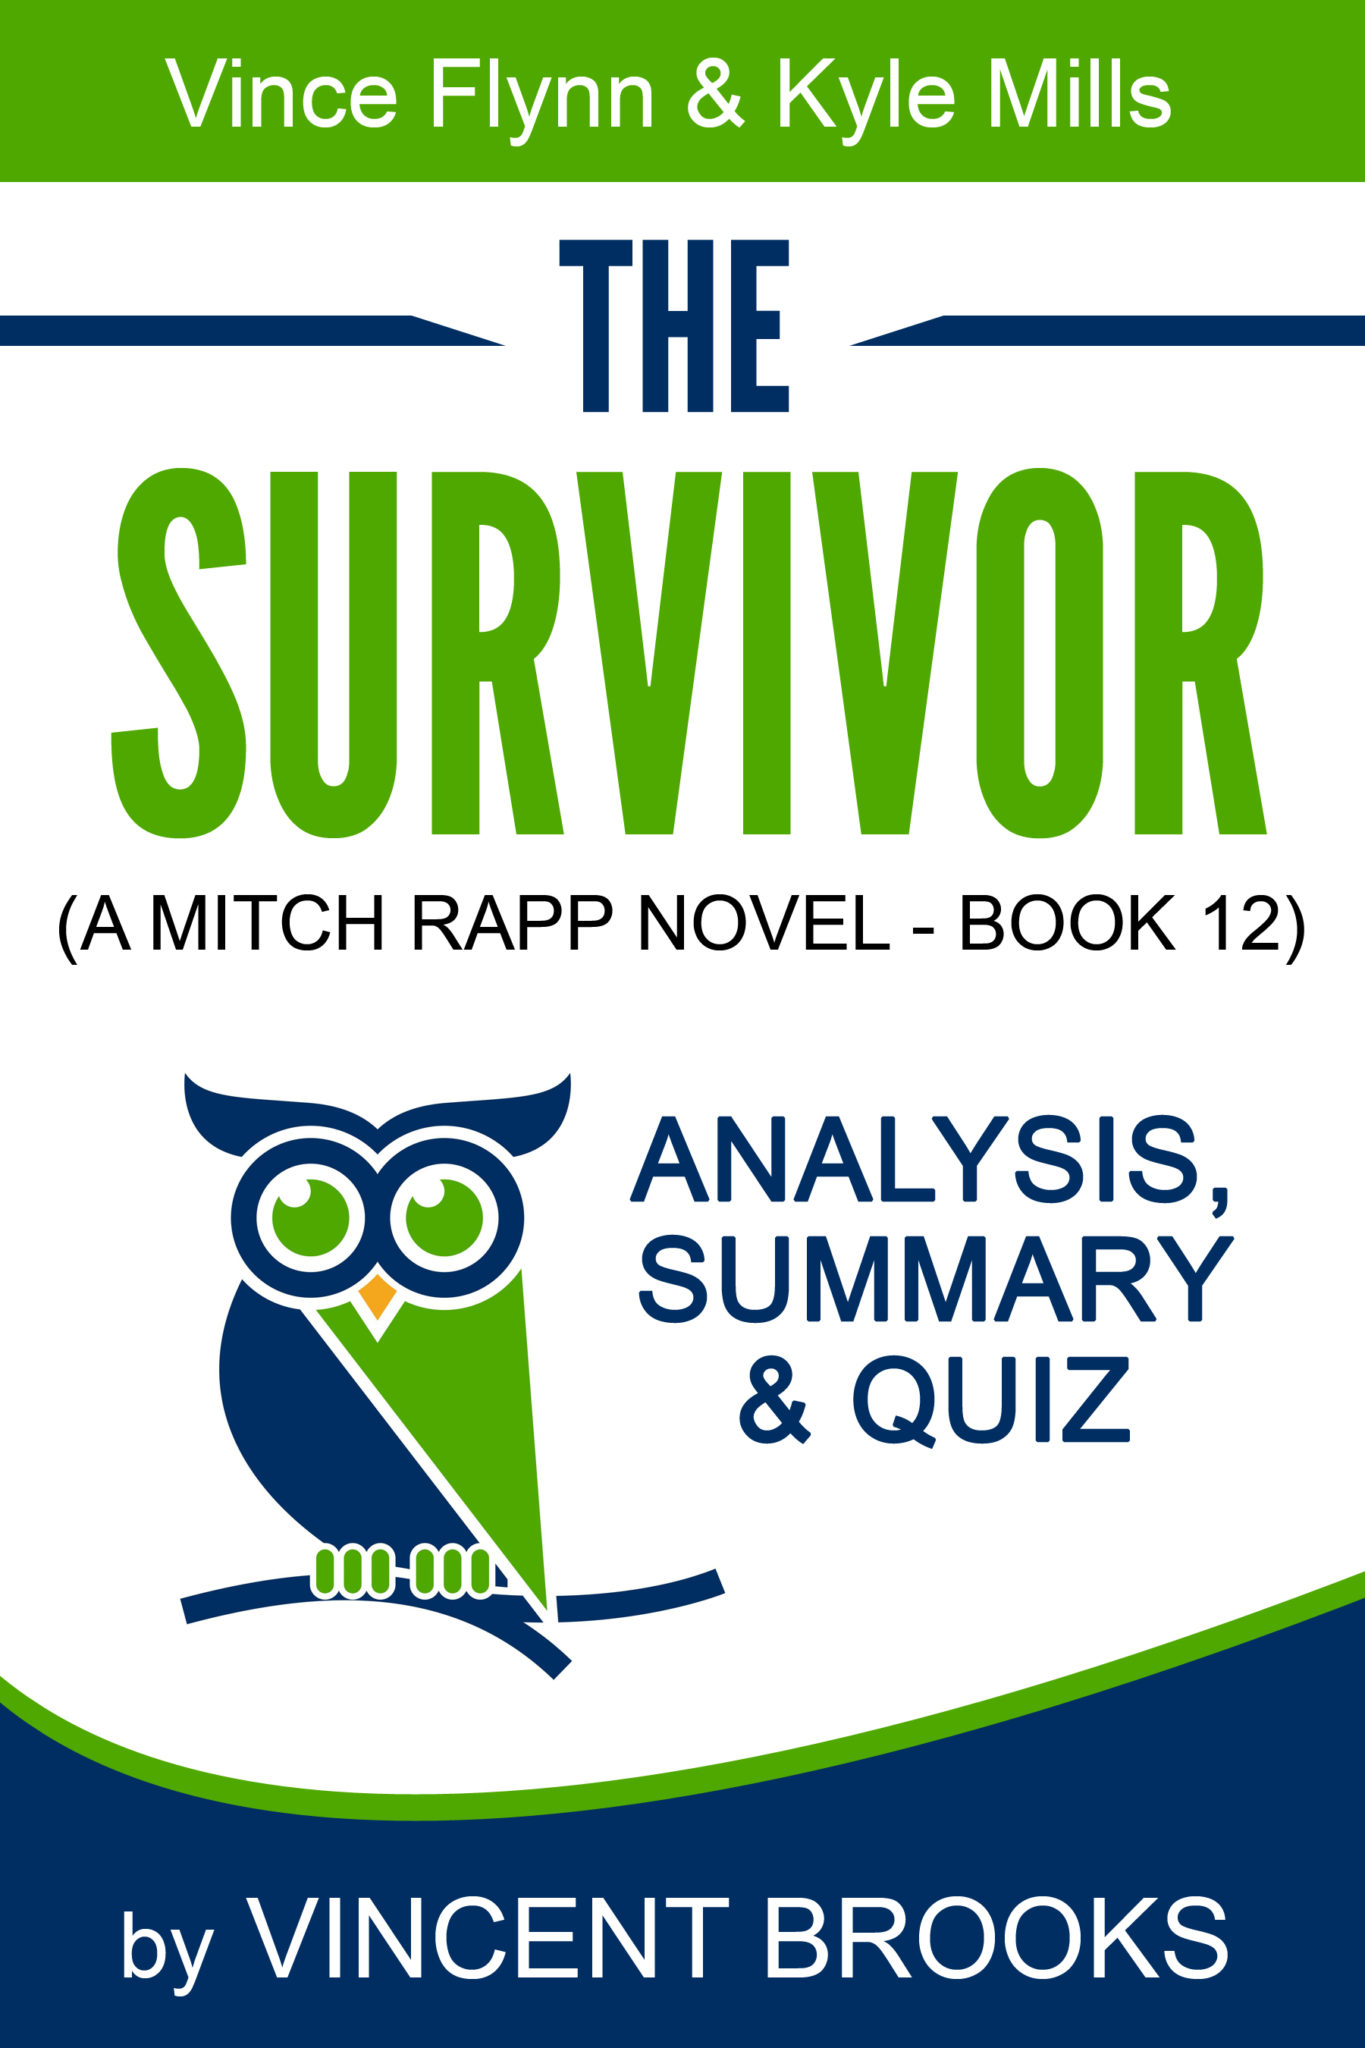 FREE: The Survivor: (A Mitch Rapp Novel Book 12) by Vince Flynn & Kyle Mills – Analysis, Summary & Quiz by Vincent Brooks